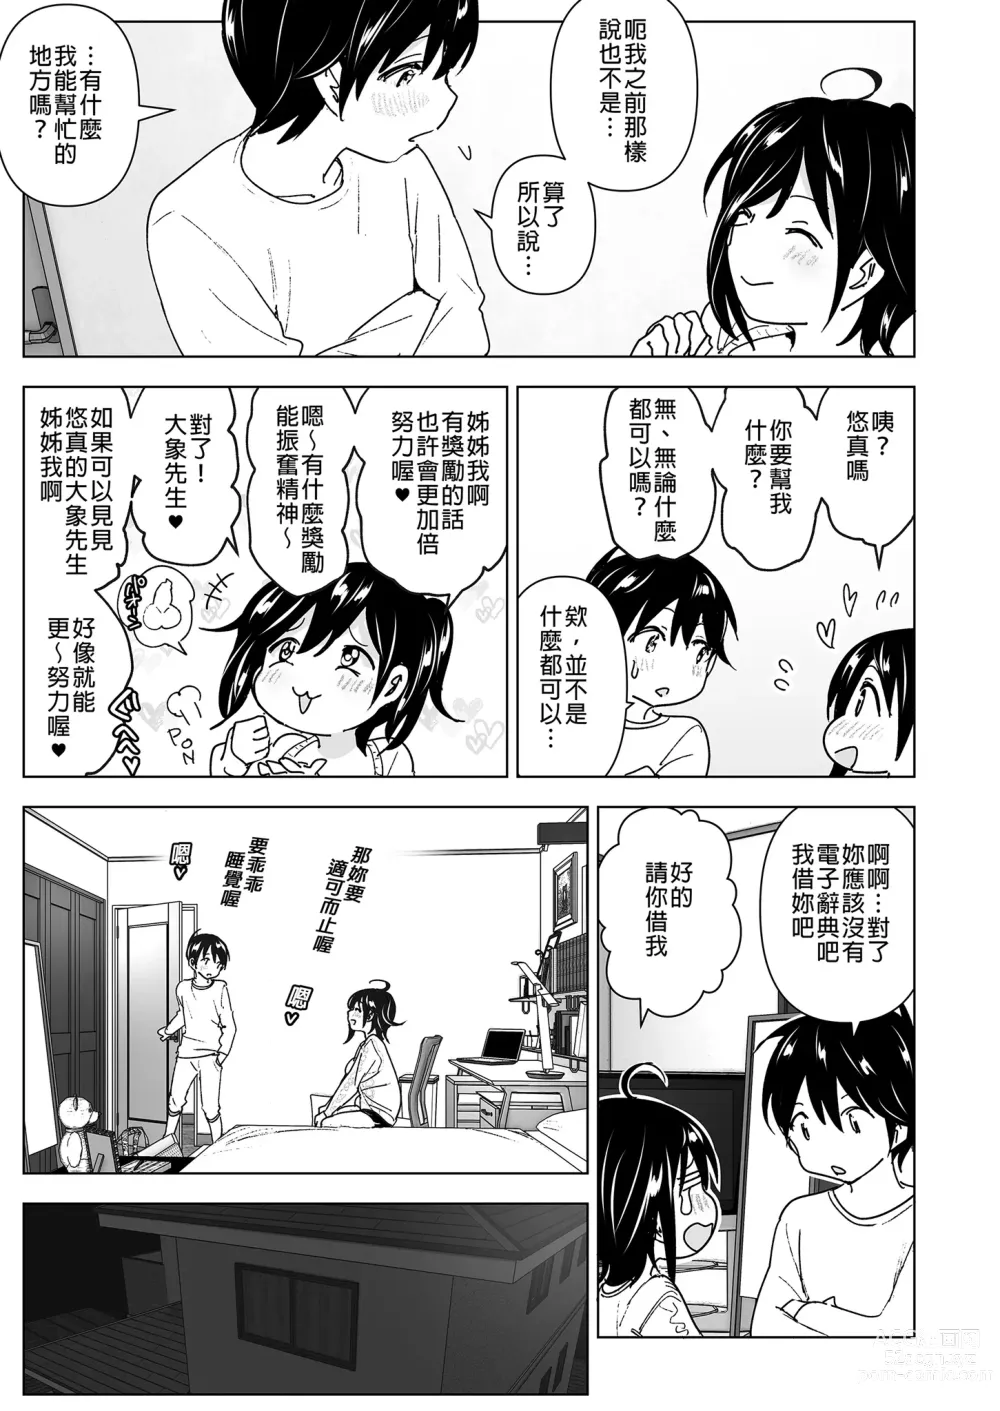 Page 23 of doujinshi 姊姊與傾聽怨言的弟弟